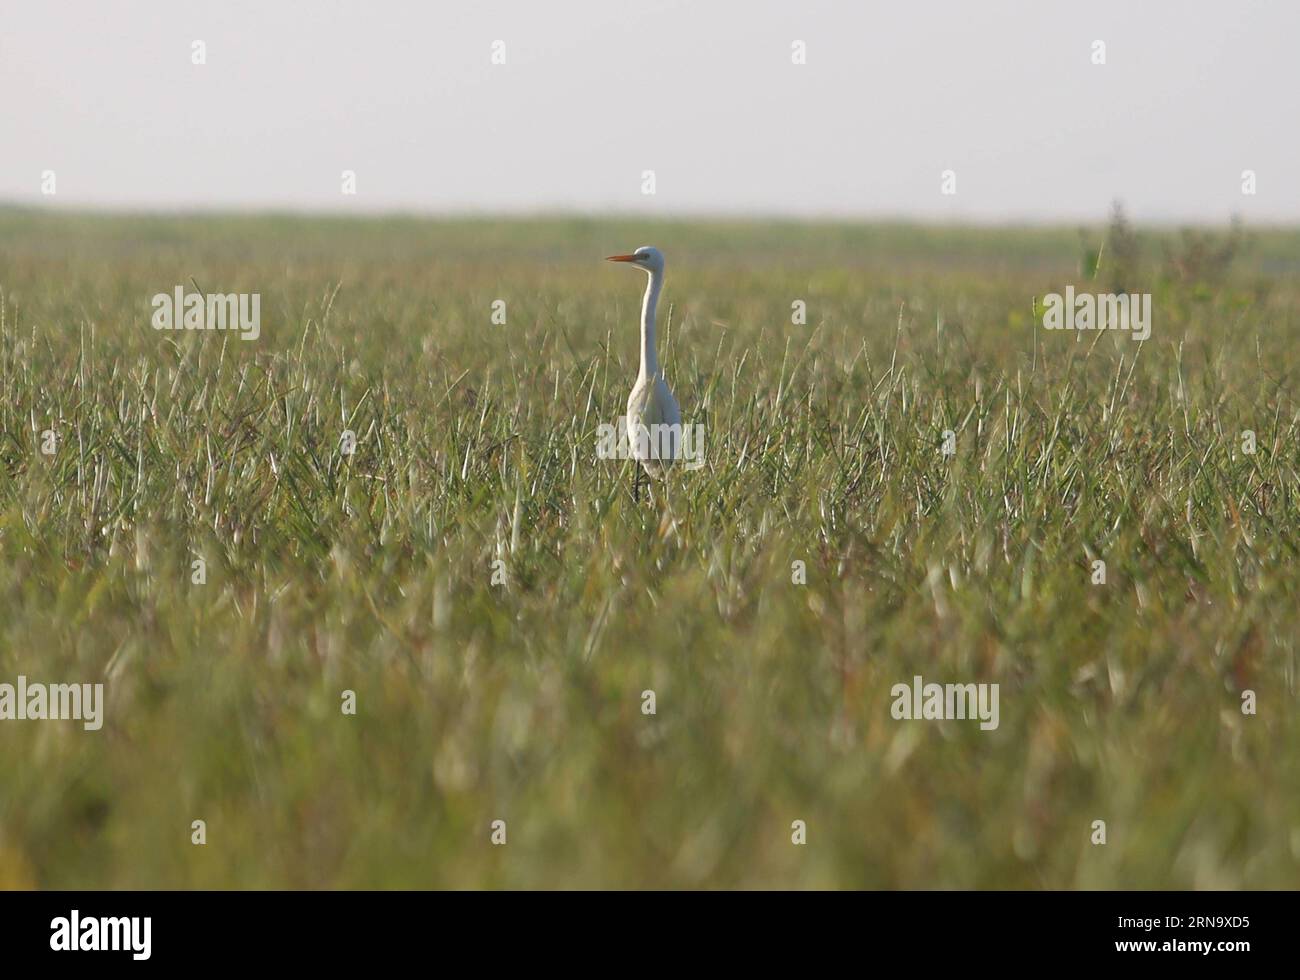 (151223) -- BAGO, Dec. 23, 2015 -- Photo taken on Dec. 23, 2015 shows a great egret at Moeyungyi Wetland Wildlife Sanctuary in Bago region, Myanmar. Moeyungyi Wetlands is situated in Bago Division. Every year, millions of birds usually fly from the northern hemisphere to the south along the East-Asian Australian Flyway to escape from winter. They stop to rest and feed in Asia. So the flyway contains a network of wetlands and Moeyungyi is one of which could cooperate to certain migrated as well as domestic birds. ) MYANMAR-BAGO-WETLAND-WILDLIFE UxAung PUBLICATIONxNOTxINxCHN   151223 Bago DEC 23 Stock Photo